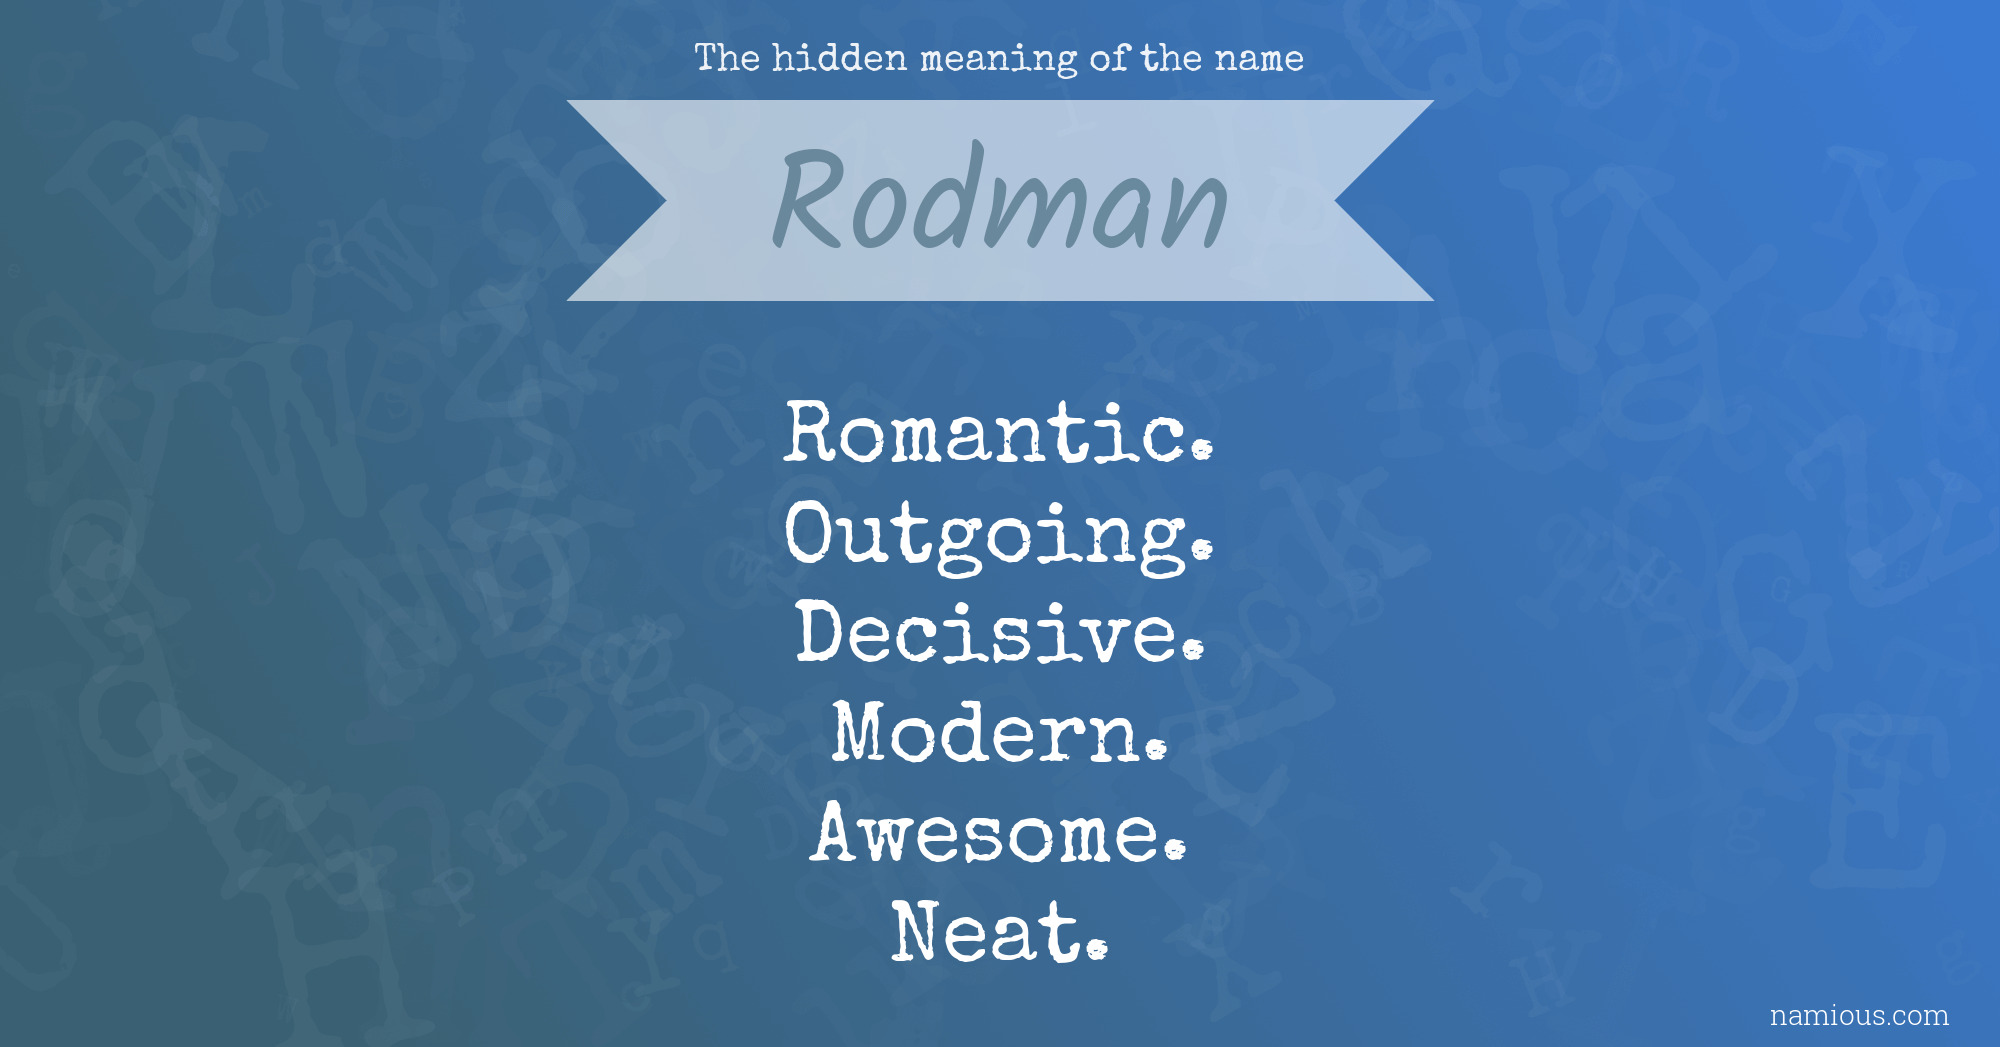 The hidden meaning of the name Rodman